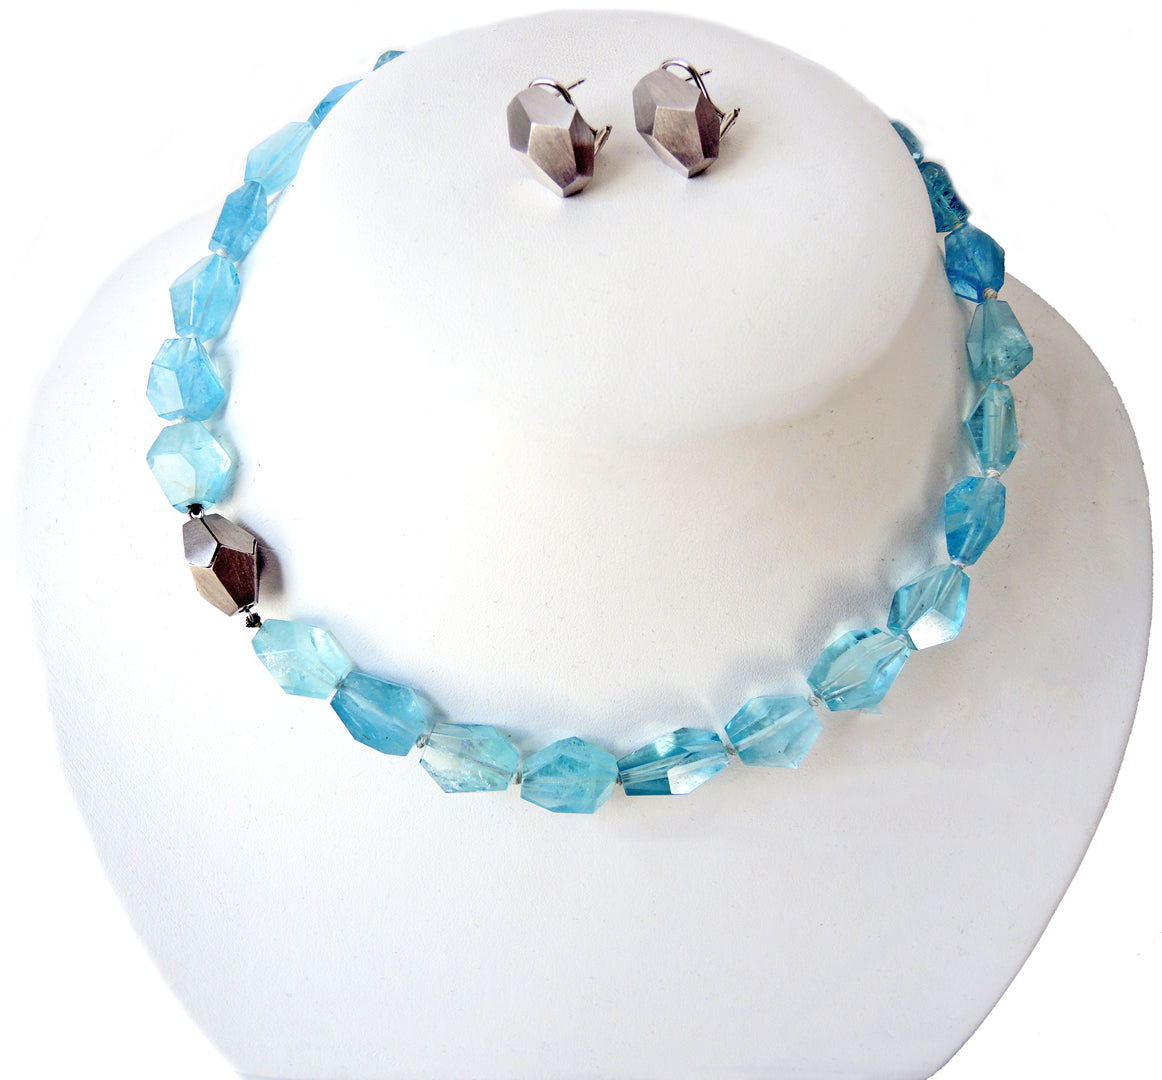 Series 34 - Cubist | Earring and Necklace, 18k White + Aquamarine Beads